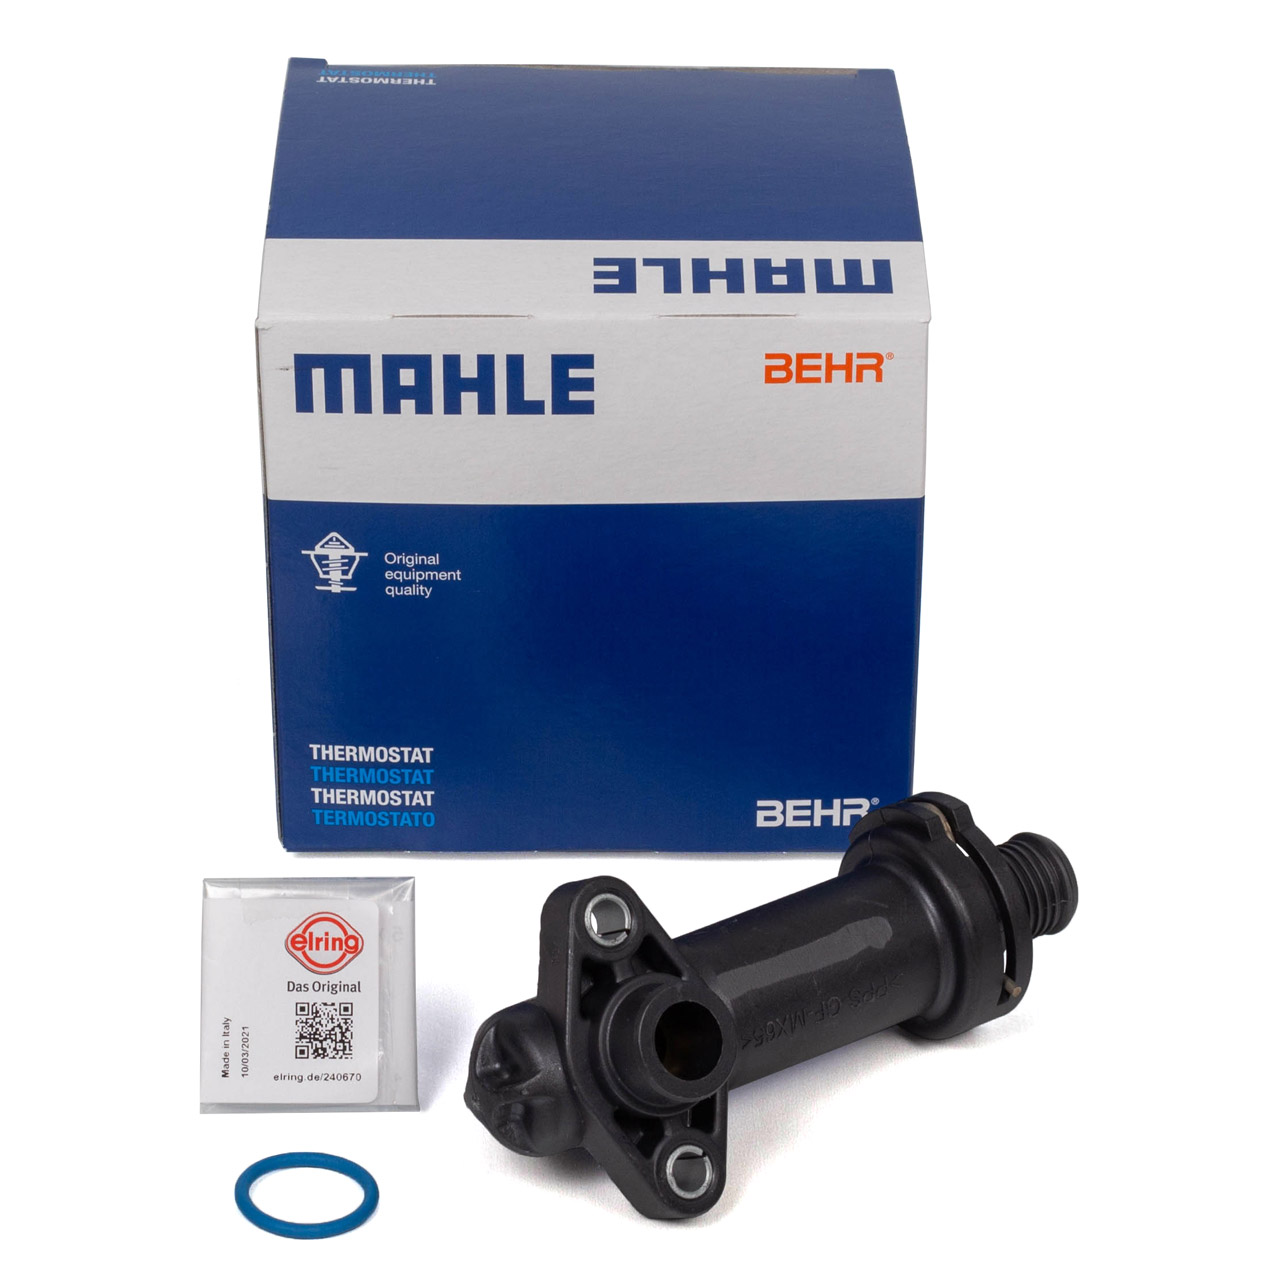 https://www.ws-autoteile.com/img/MAHLE_KUEHLMITTEL-THERMOSTAT+BMW_DICHTUNG_PKT862W571_202209231028_99.jpg